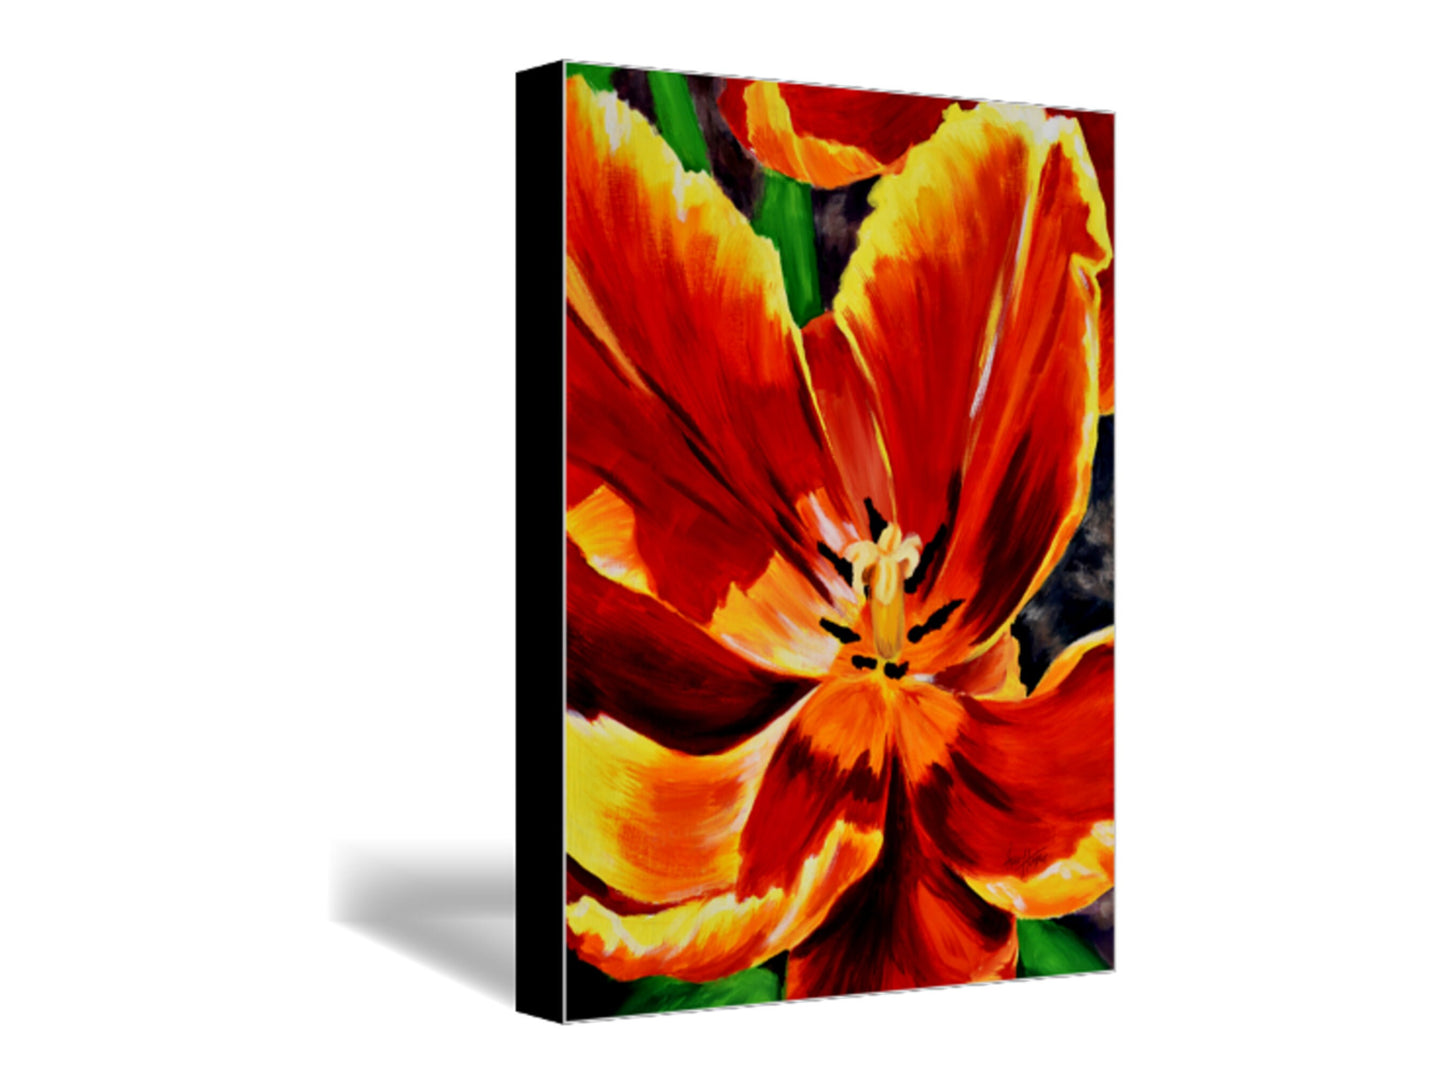 Flower Painting, Tulip Painting, Large Wall Art, Oil Painting, Canvas Print, Modern Wall Art